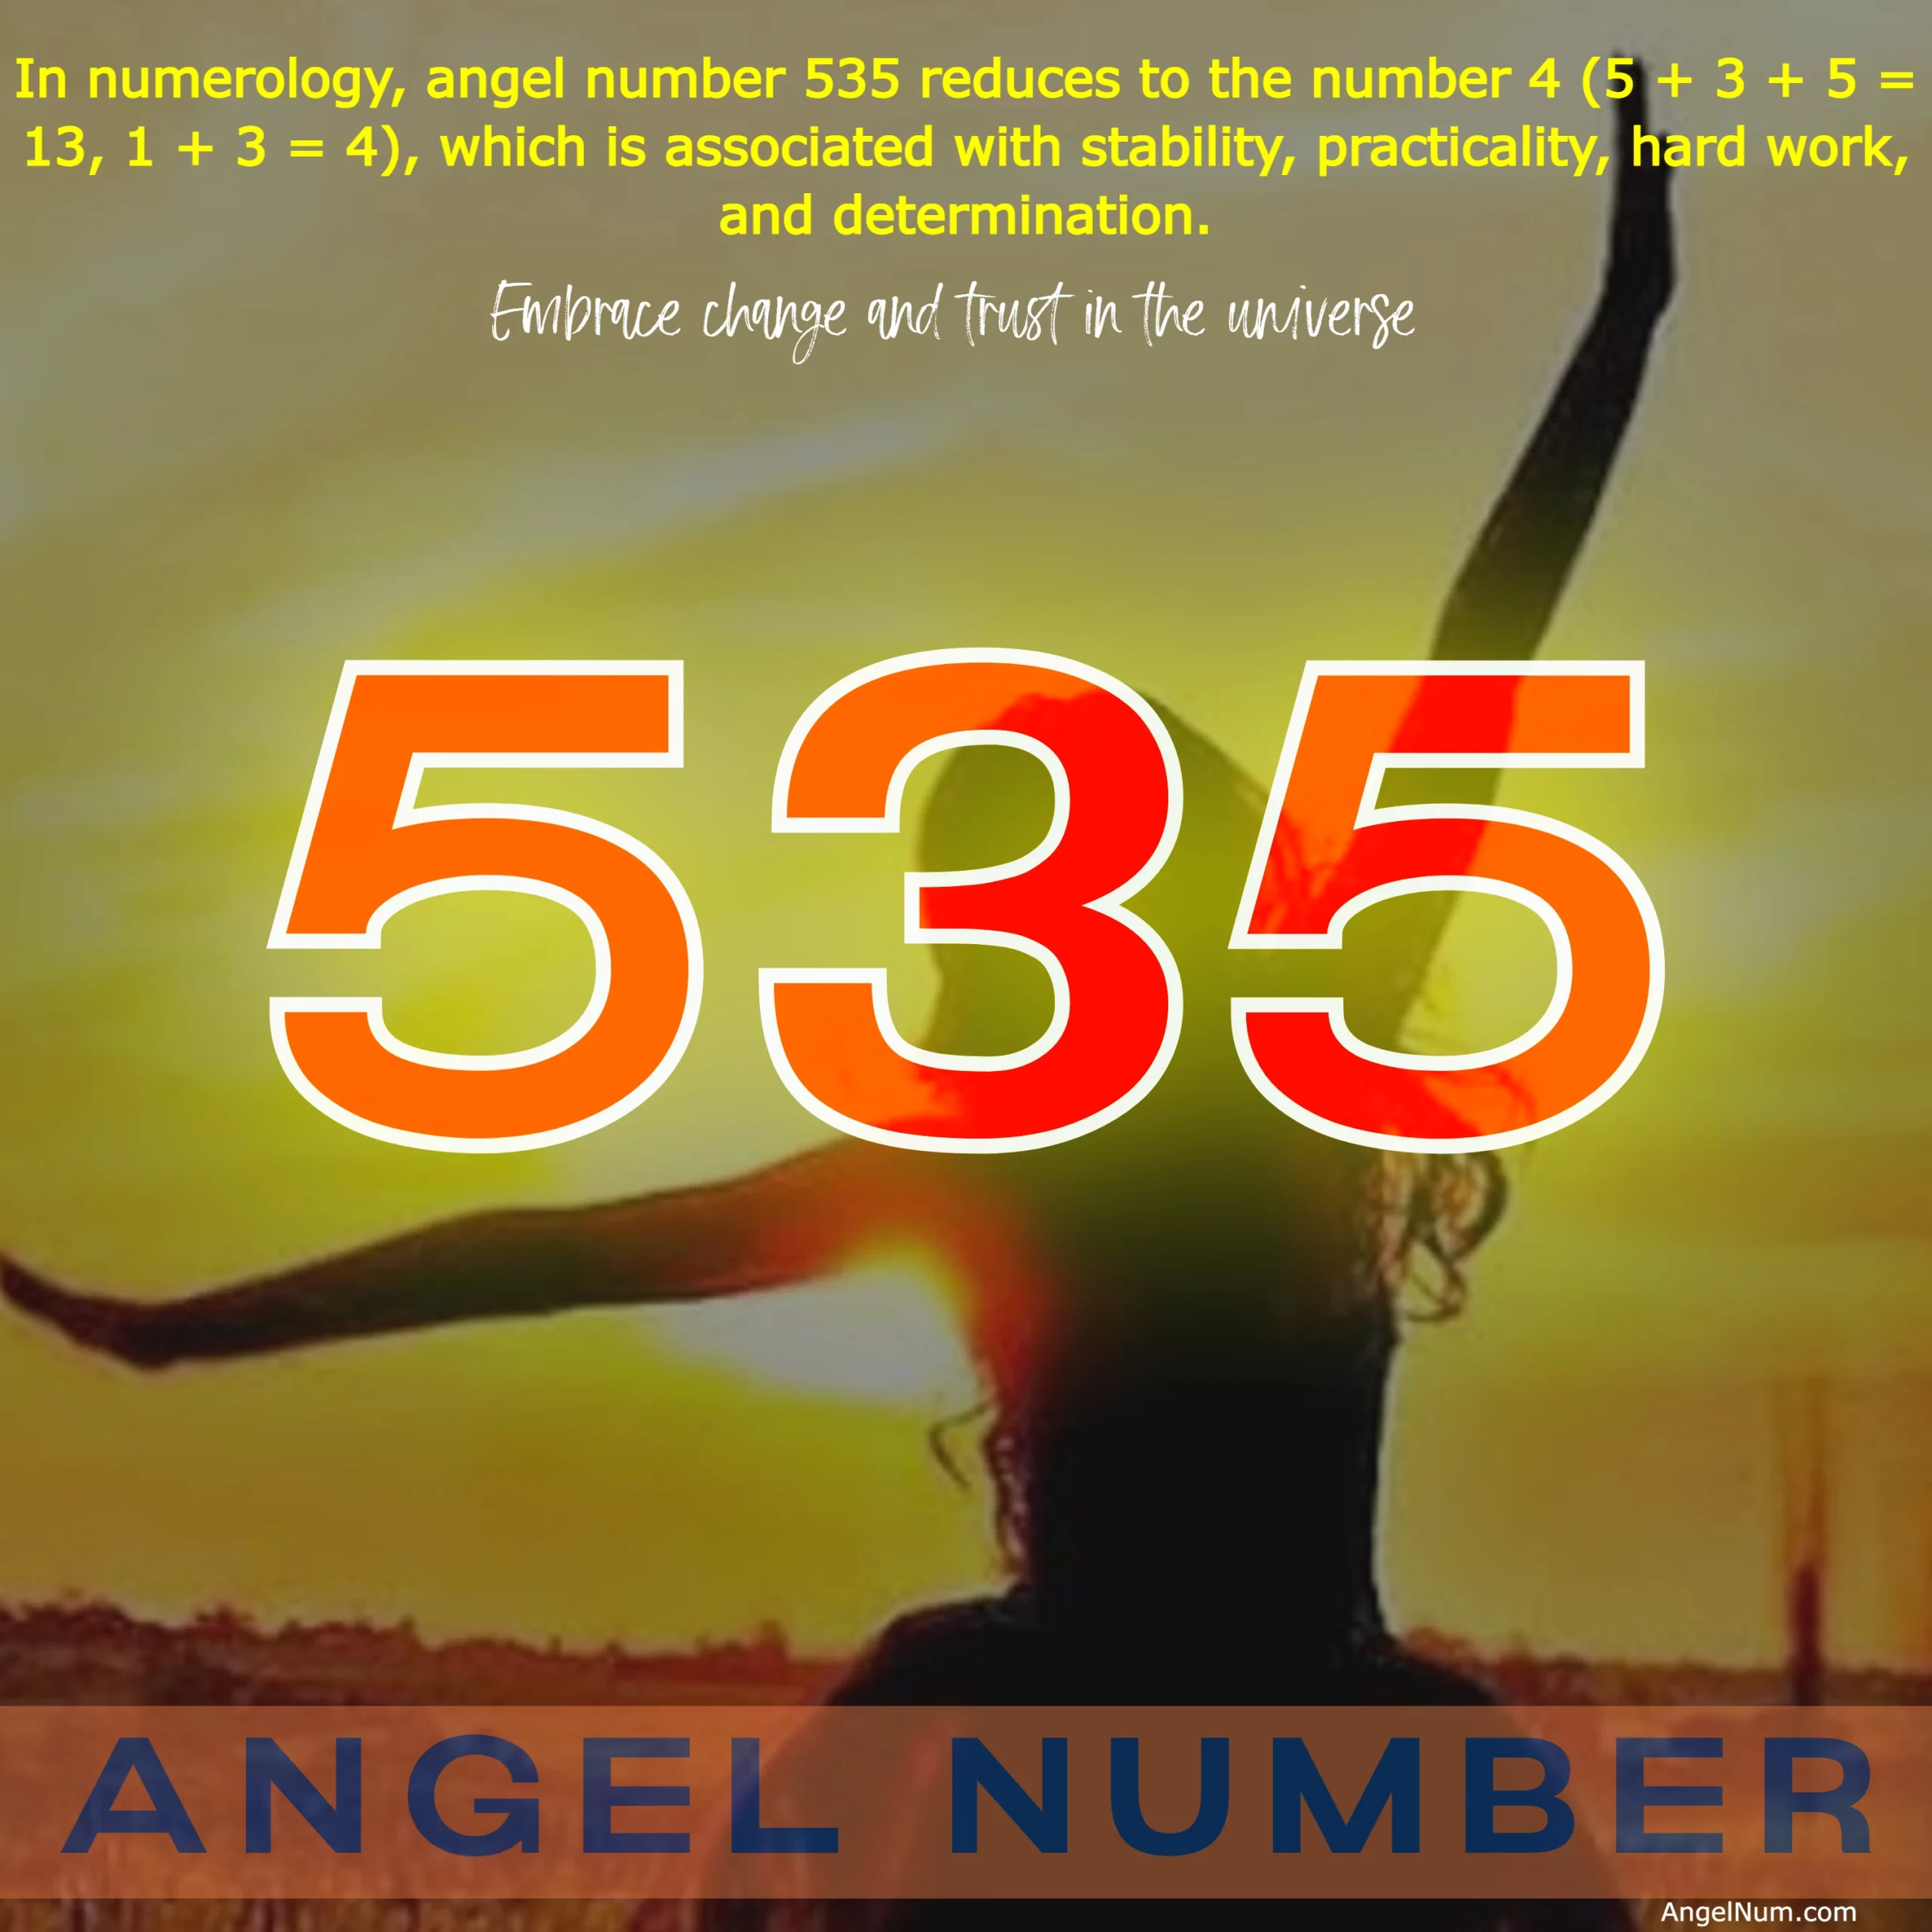 Angel Number 535: Embrace Change and Trust in the Universe